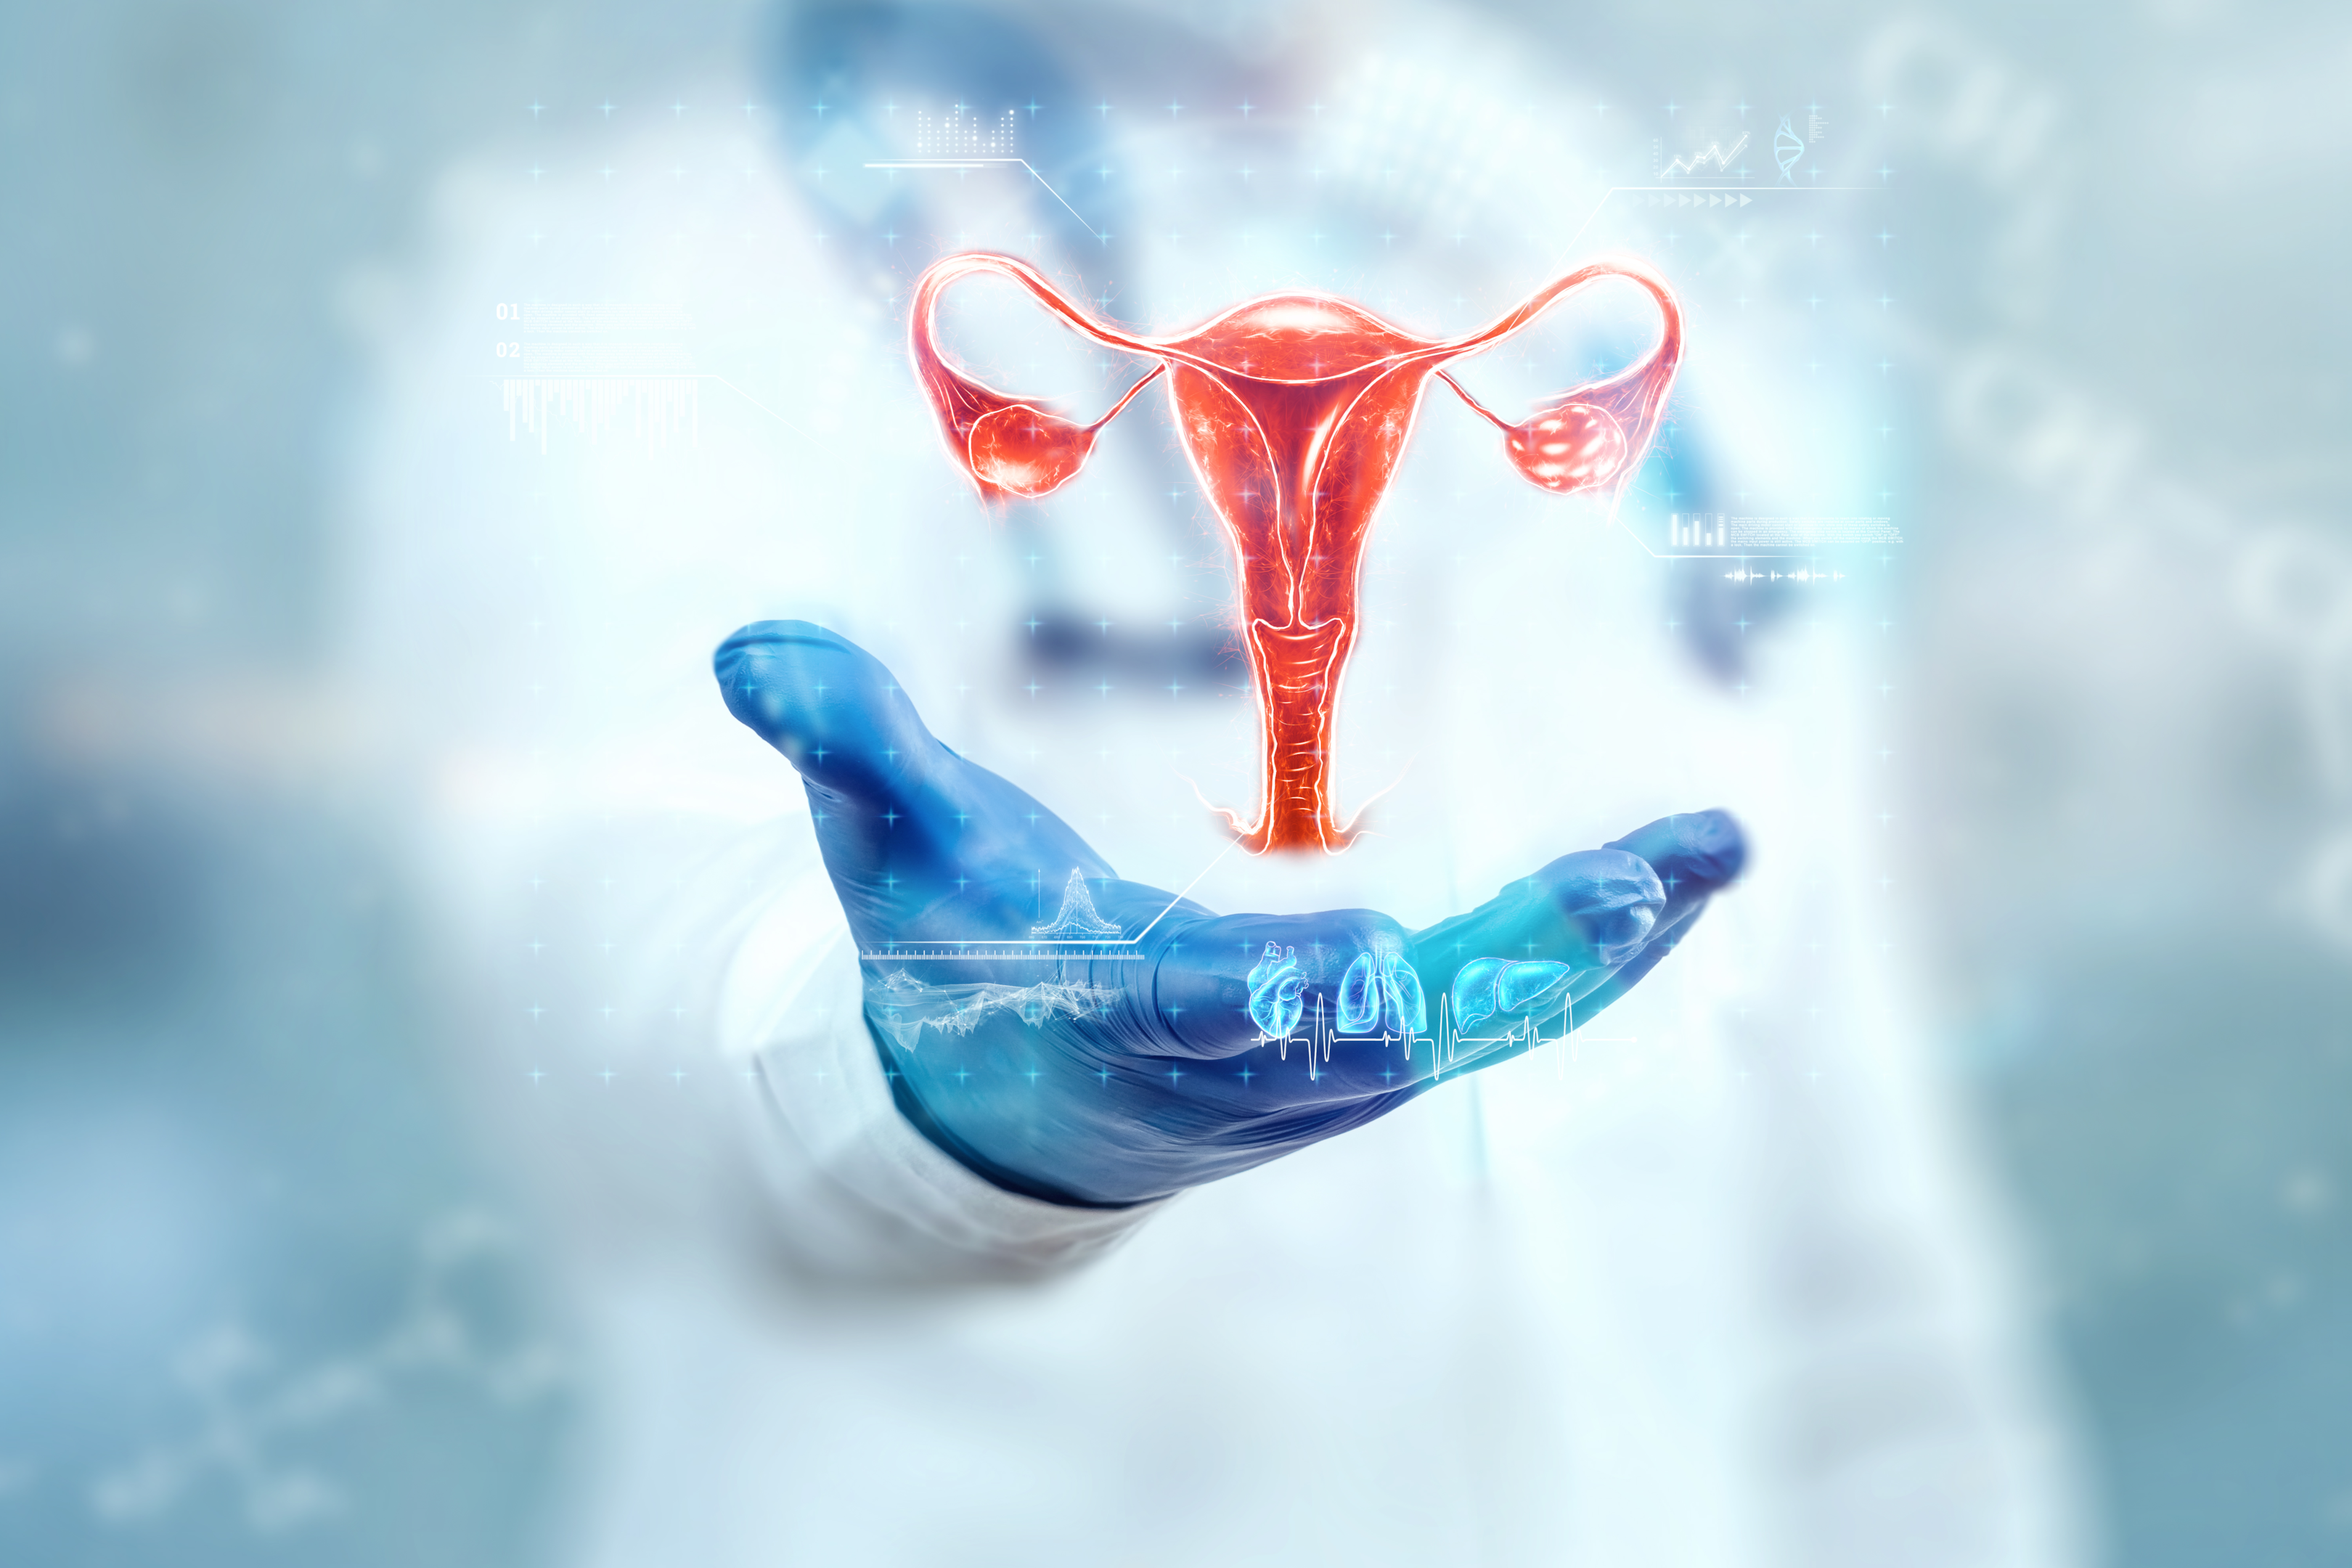 A continuous menstrual cycle requires healthy and active ovaries.